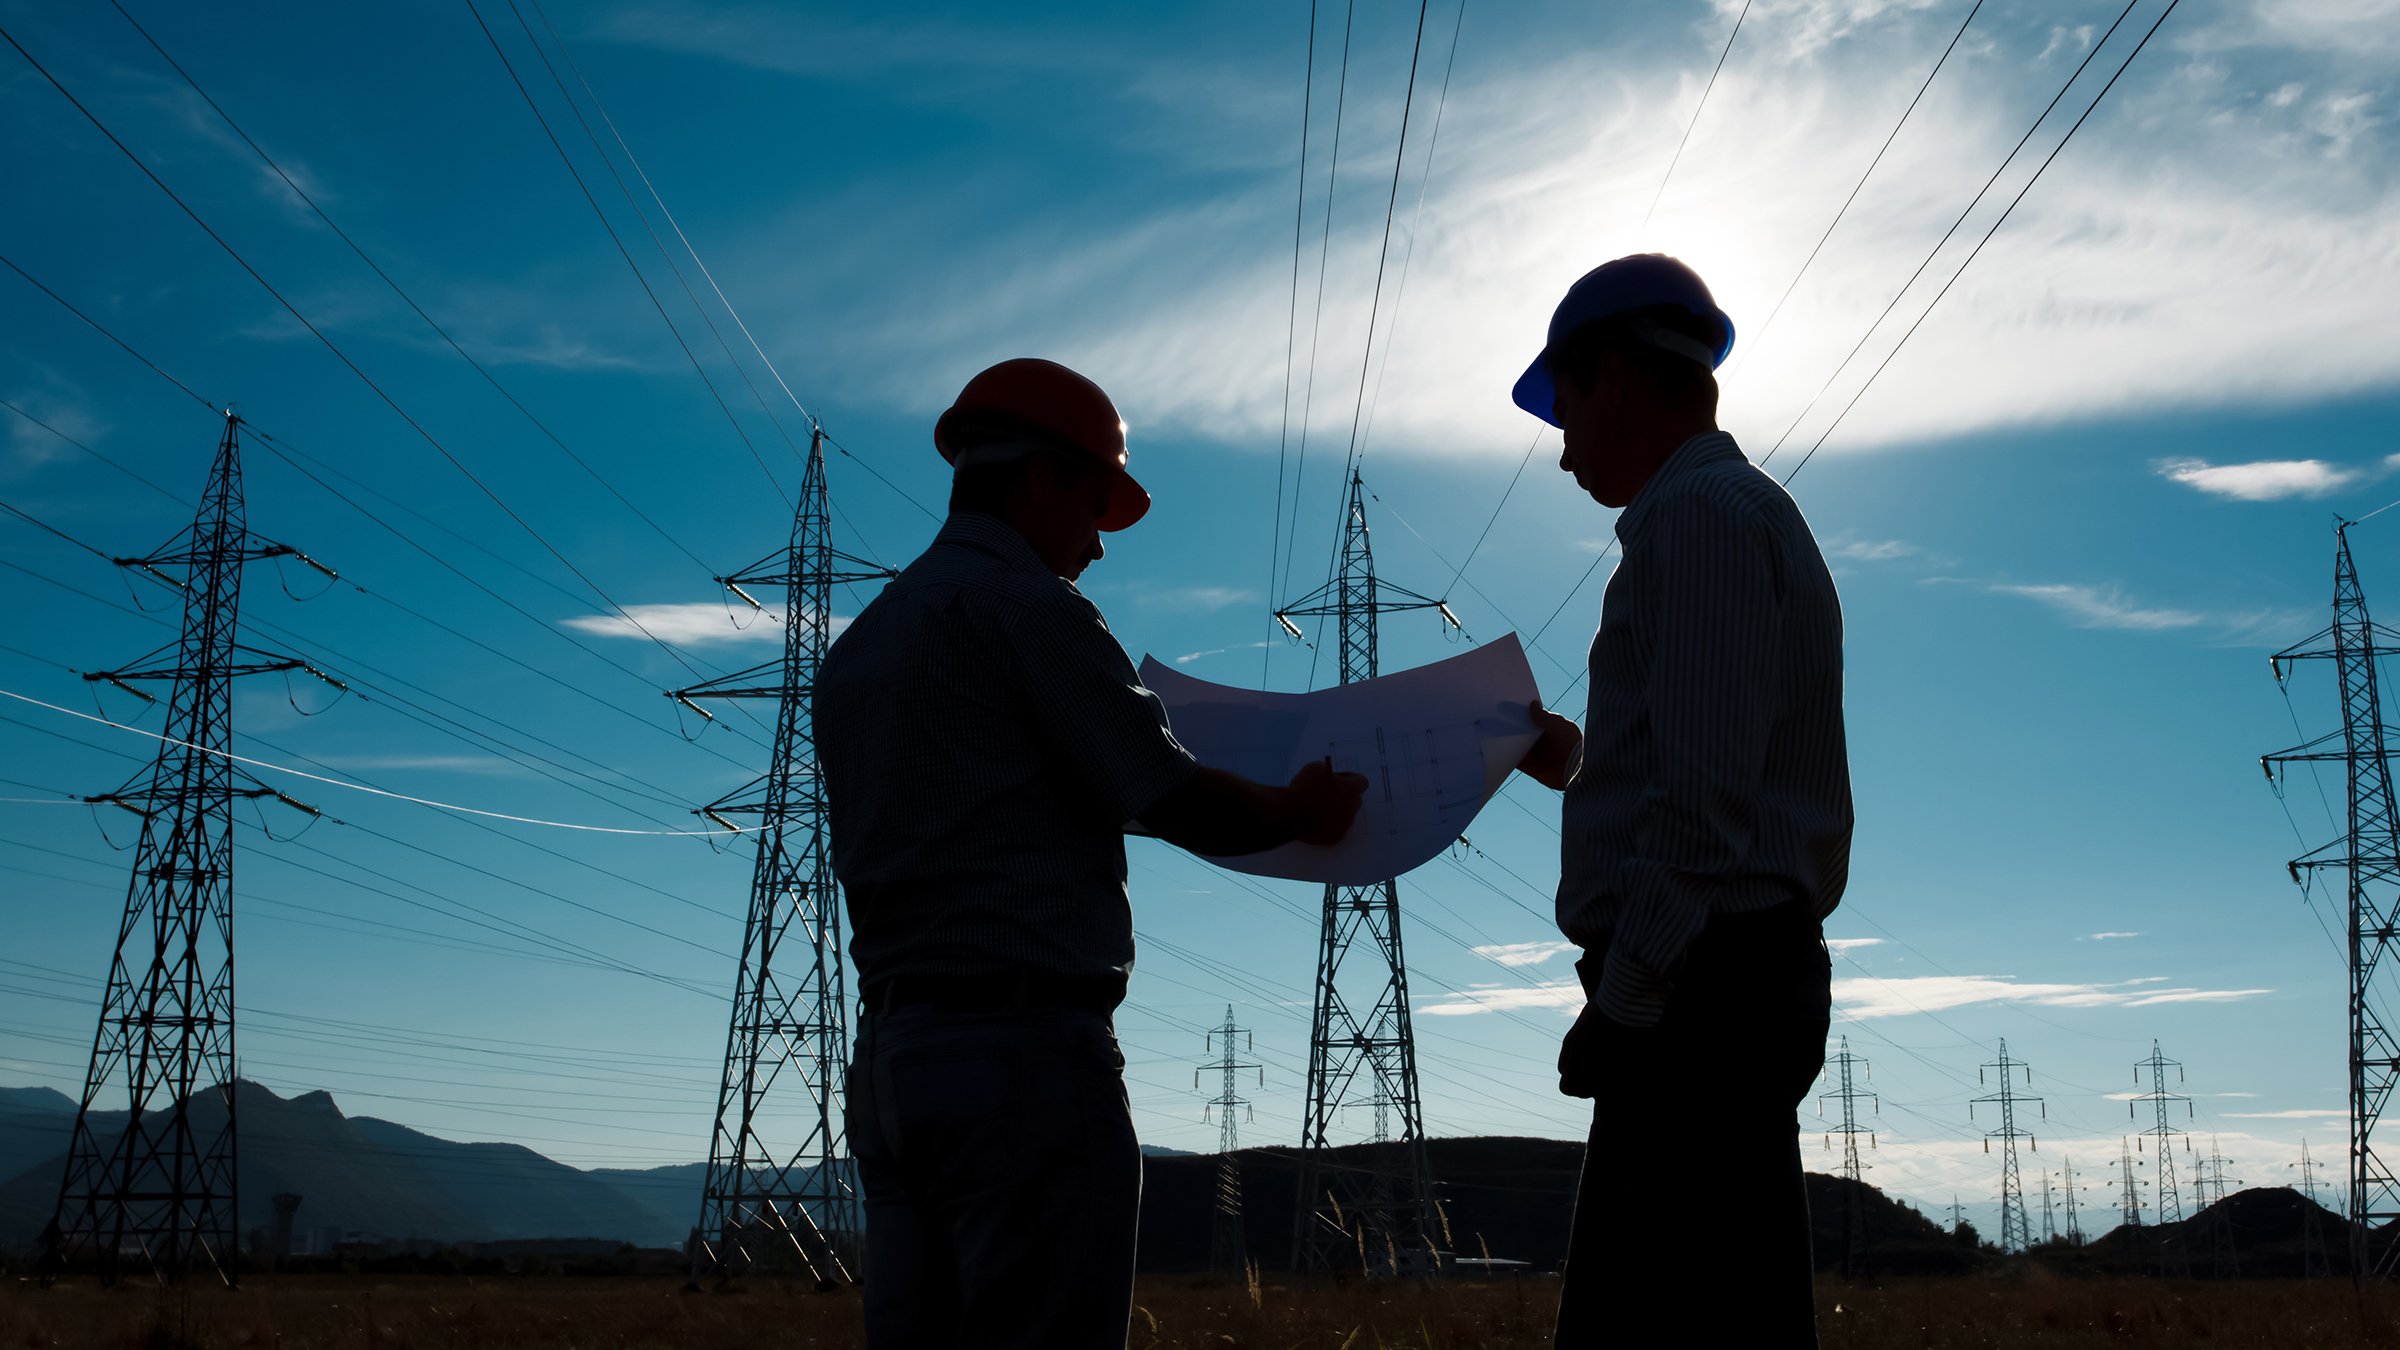 Silhouette of two male engineers in hard hats standing at electricity station, discussing critical infrastructure and how to protect it from hackers.